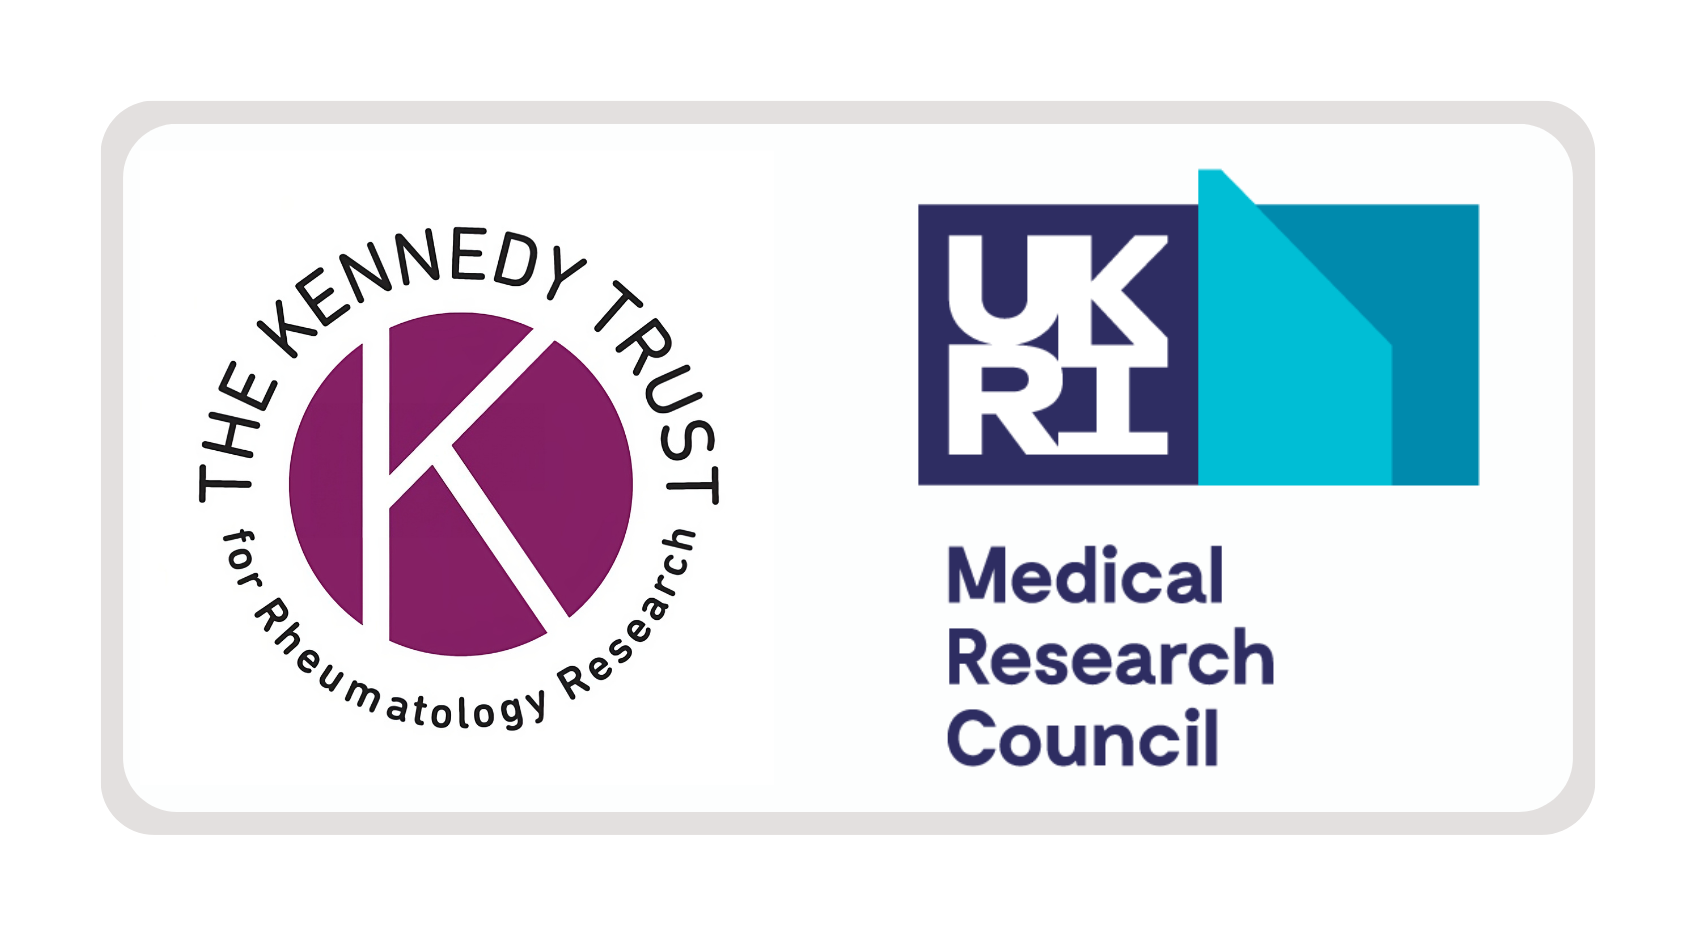 The Kennedy Trust & Medical Research Council